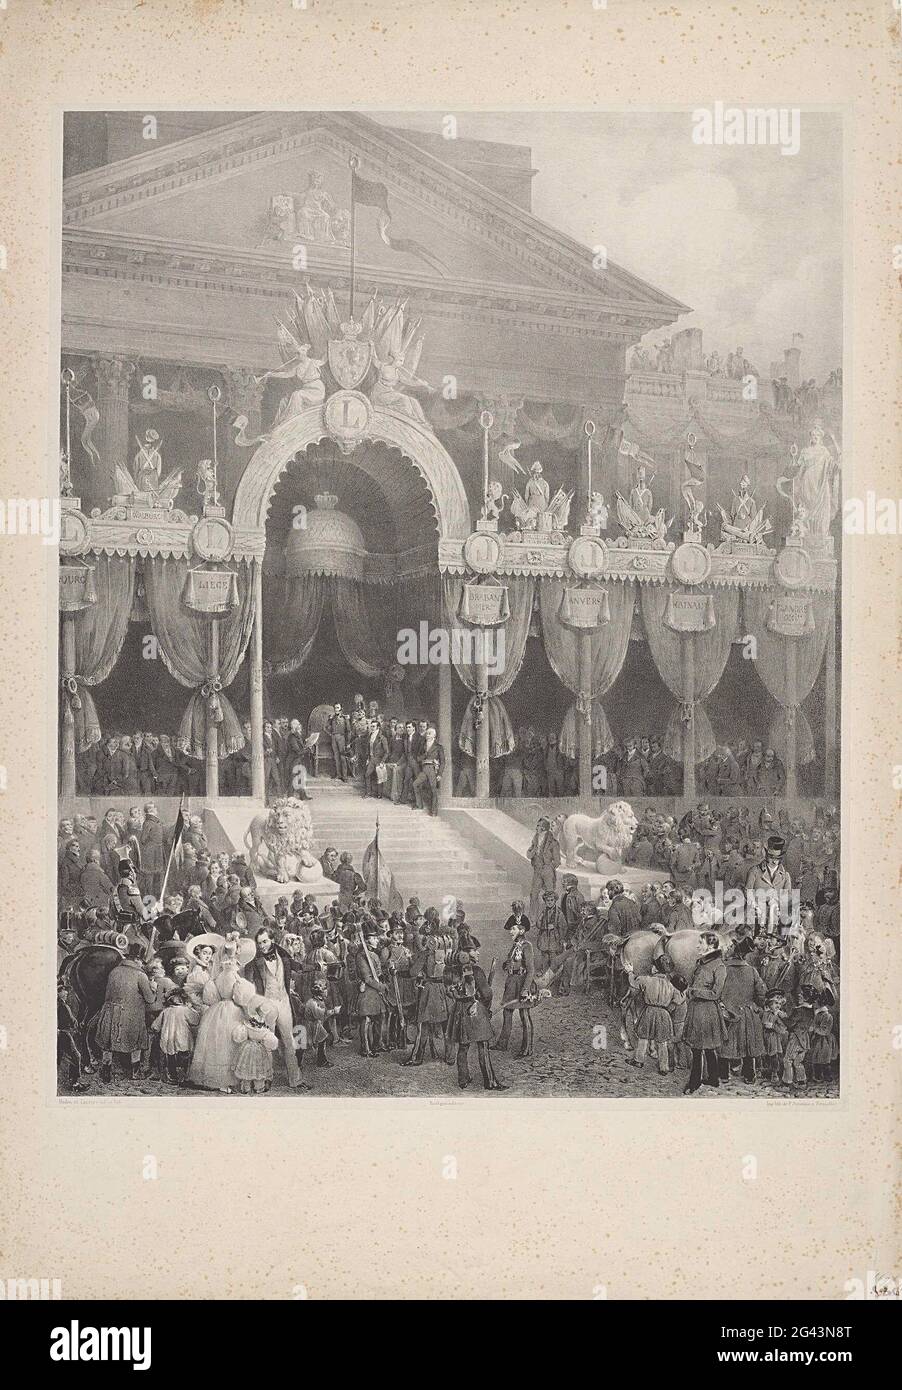 Inderding from Leopold I as King of Belgians, 1831. Solemn inauguration of King Leopold I in Brussels on July 21, 1831. The king standing between government officials and guests a speech by Surlet de Chokier, accrued on the estree for the Sint-Jacob church On-Koudenberg to Koningsplein. In the foreground the public and members of the volunteer corps of the Marquis de Chasteler. Stock Photo